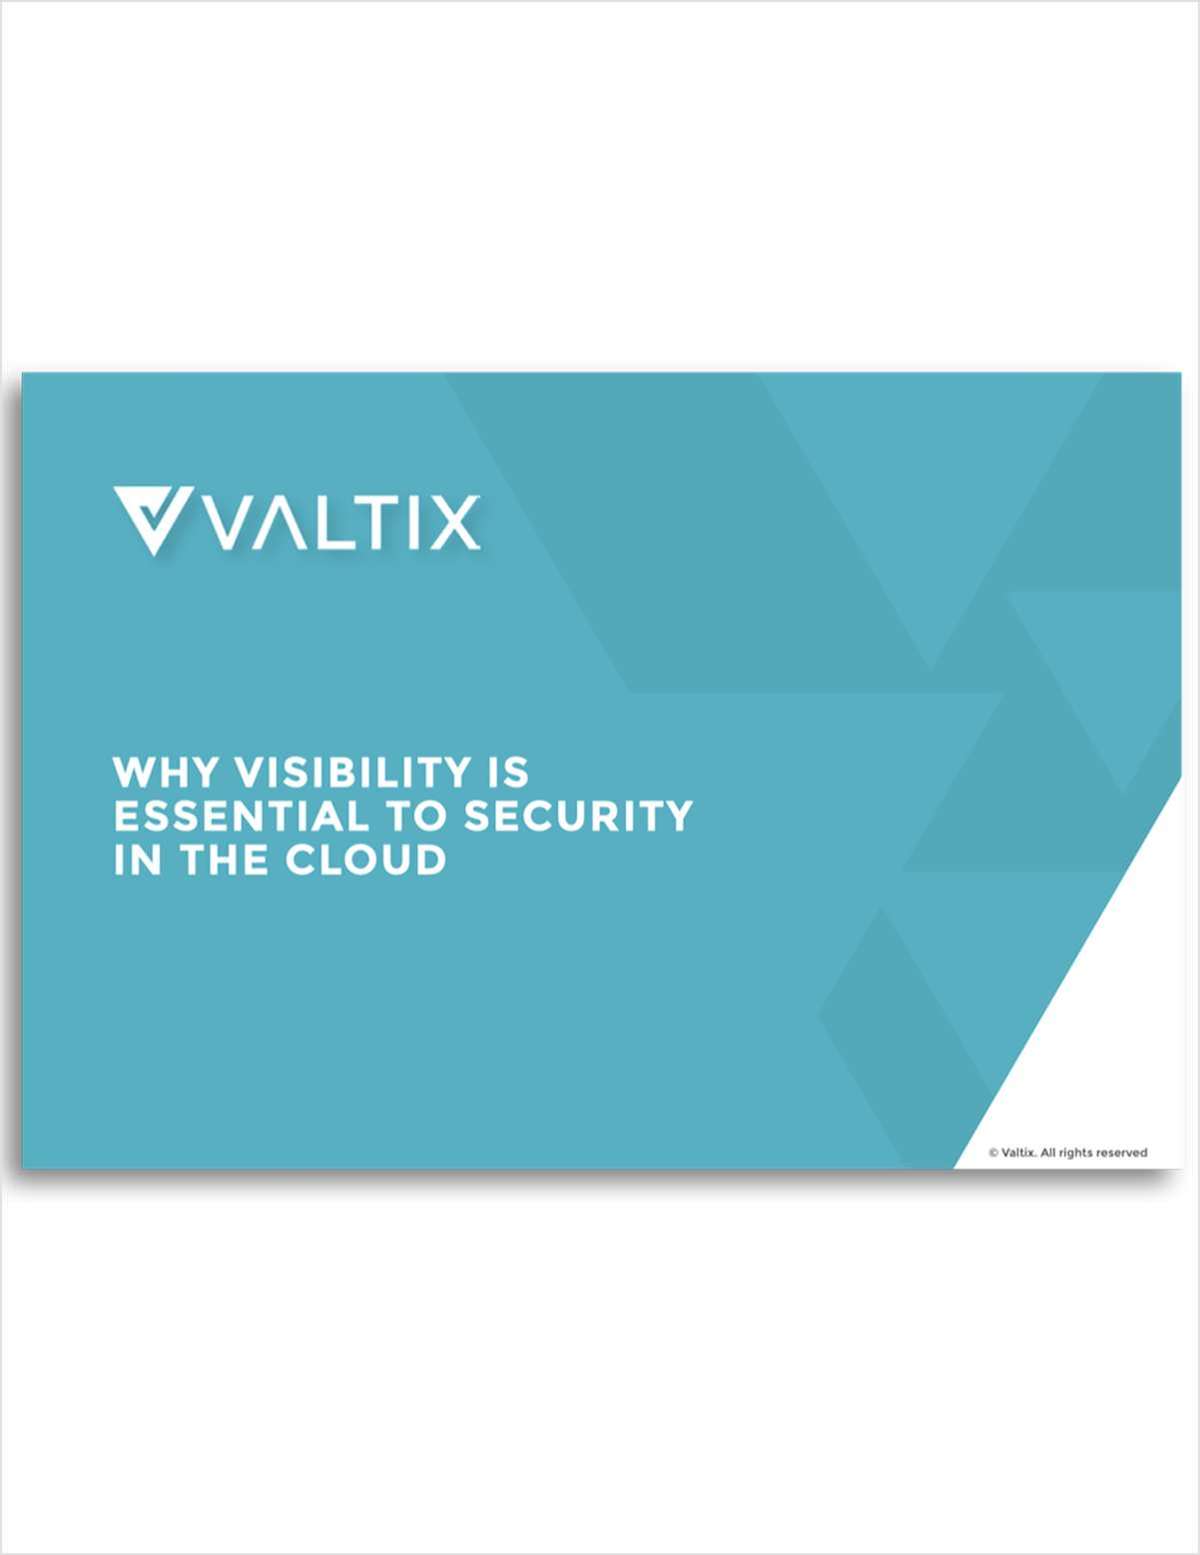 Why Visibility is Essential to Security in the Cloud